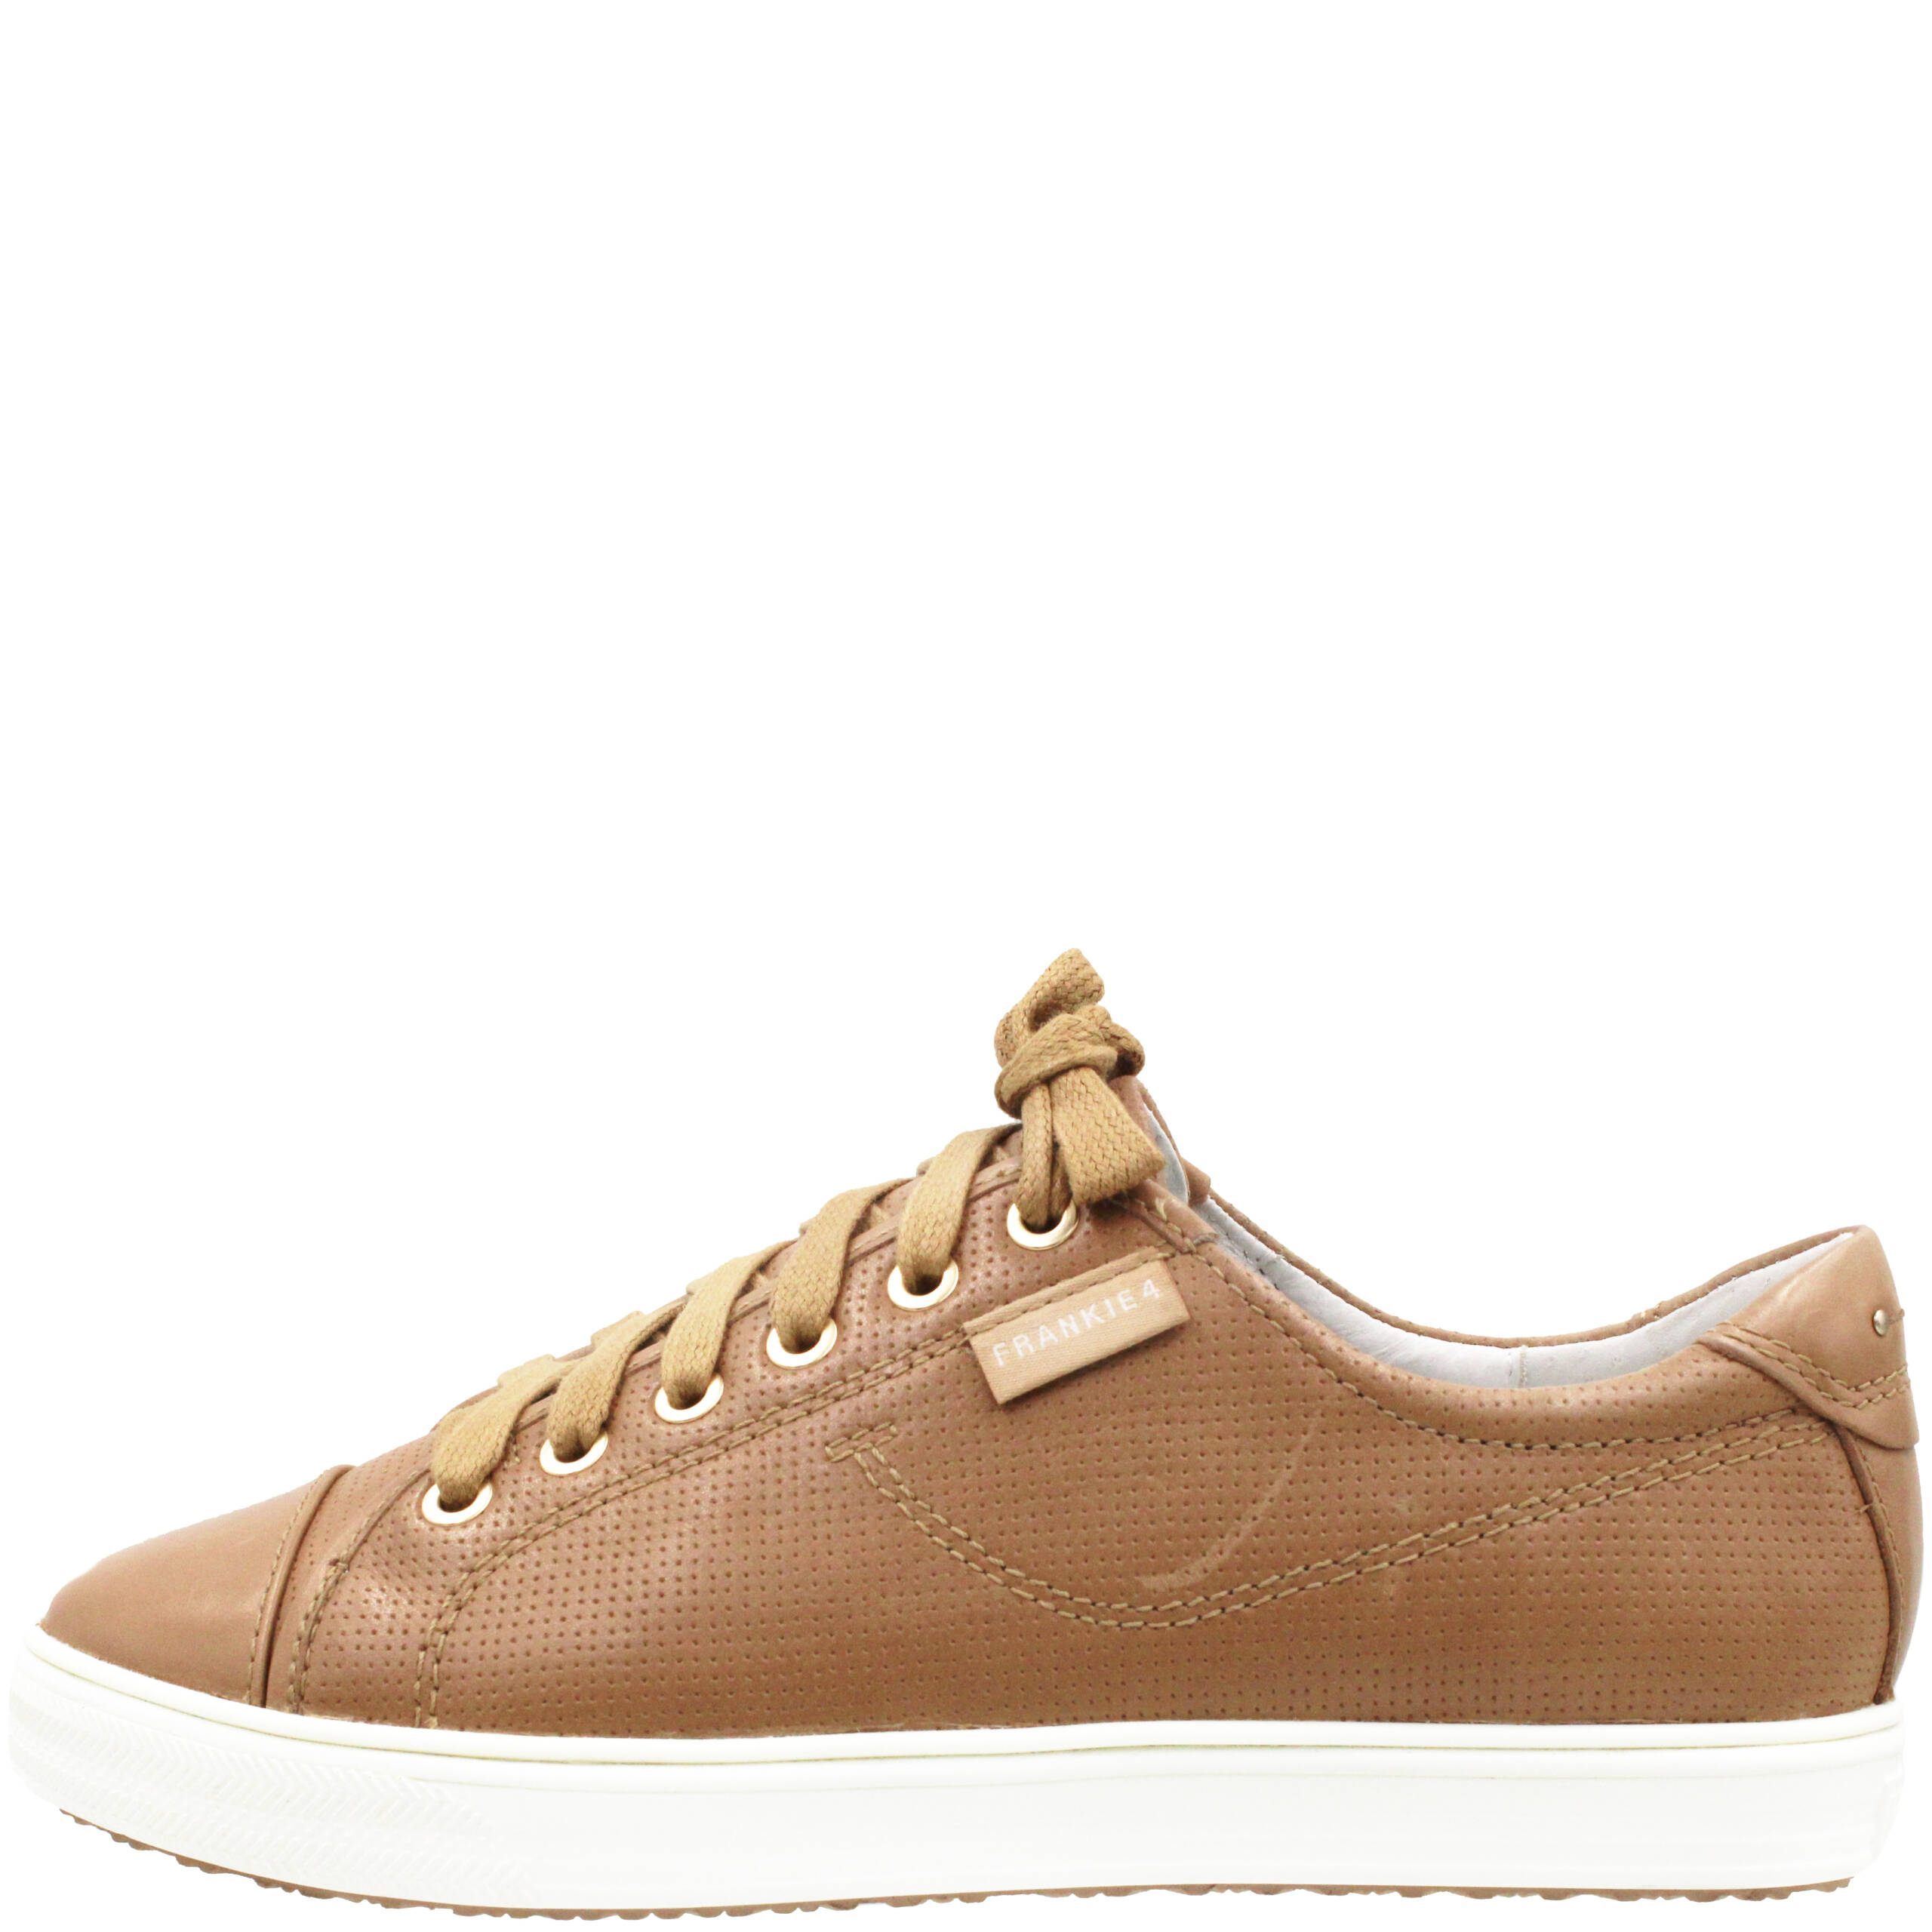 Nat III Camel Punched Leather Sneakers